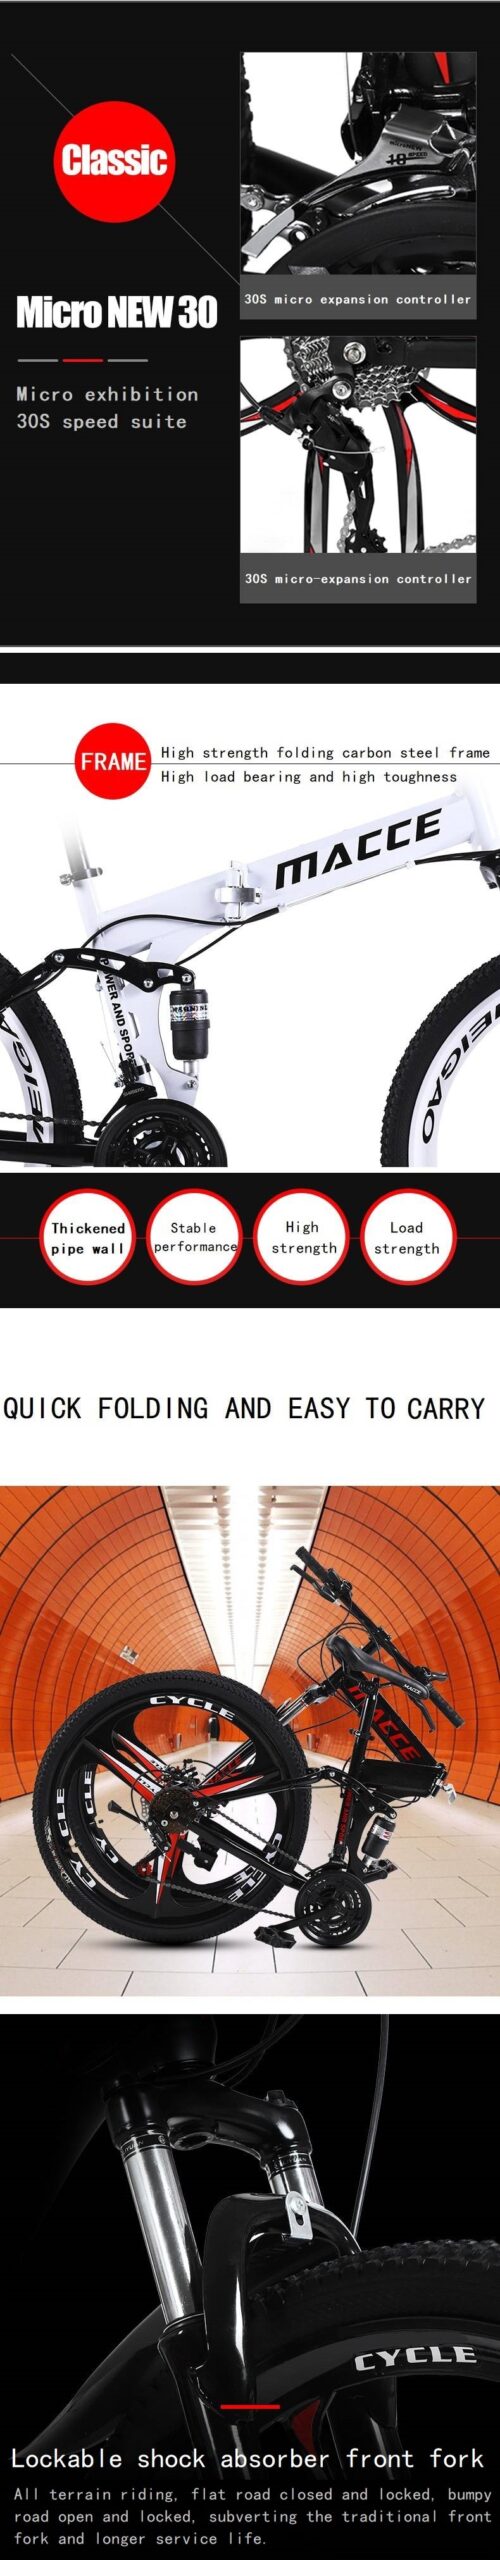 26-Inch Foldable Mountain Bike Variable Speed Bicycle